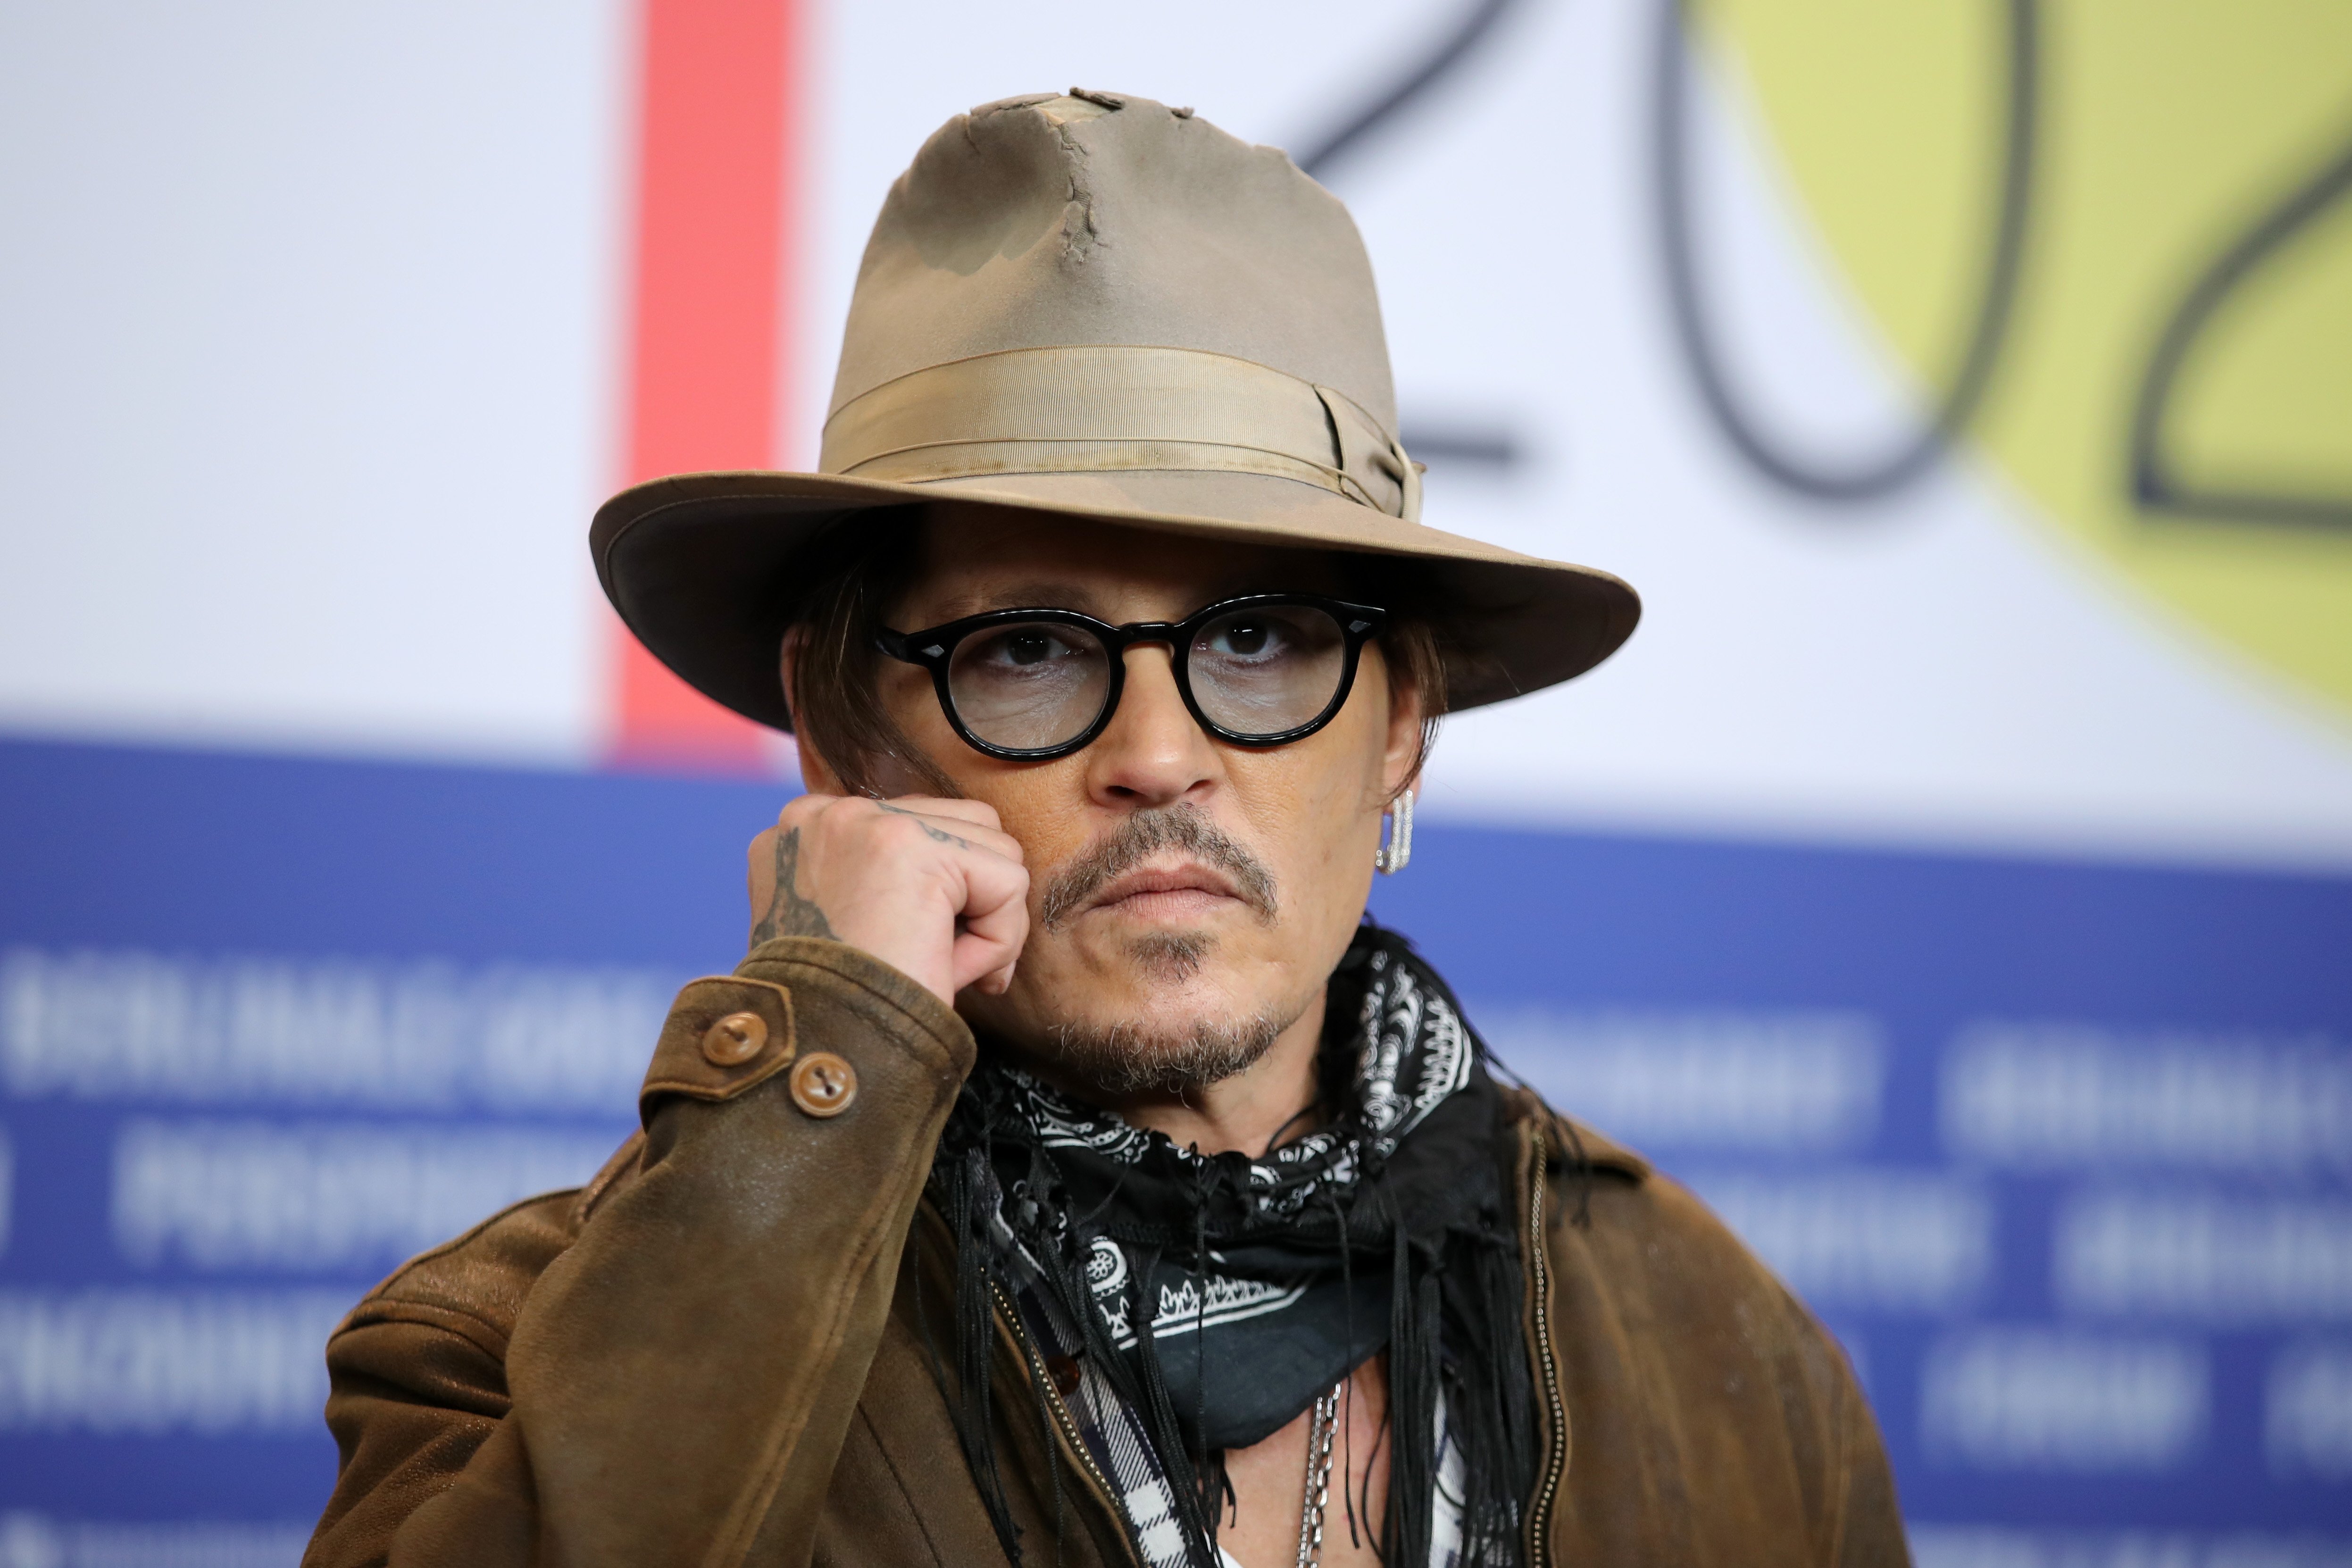 Johnny Depp is seen athe "Minamata" press conference during the 70th Berlinale International Film Festival Berlin at Grand Hyatt Hotel on February 21, 2020 in Berlin, Germany | Source: Getty Images